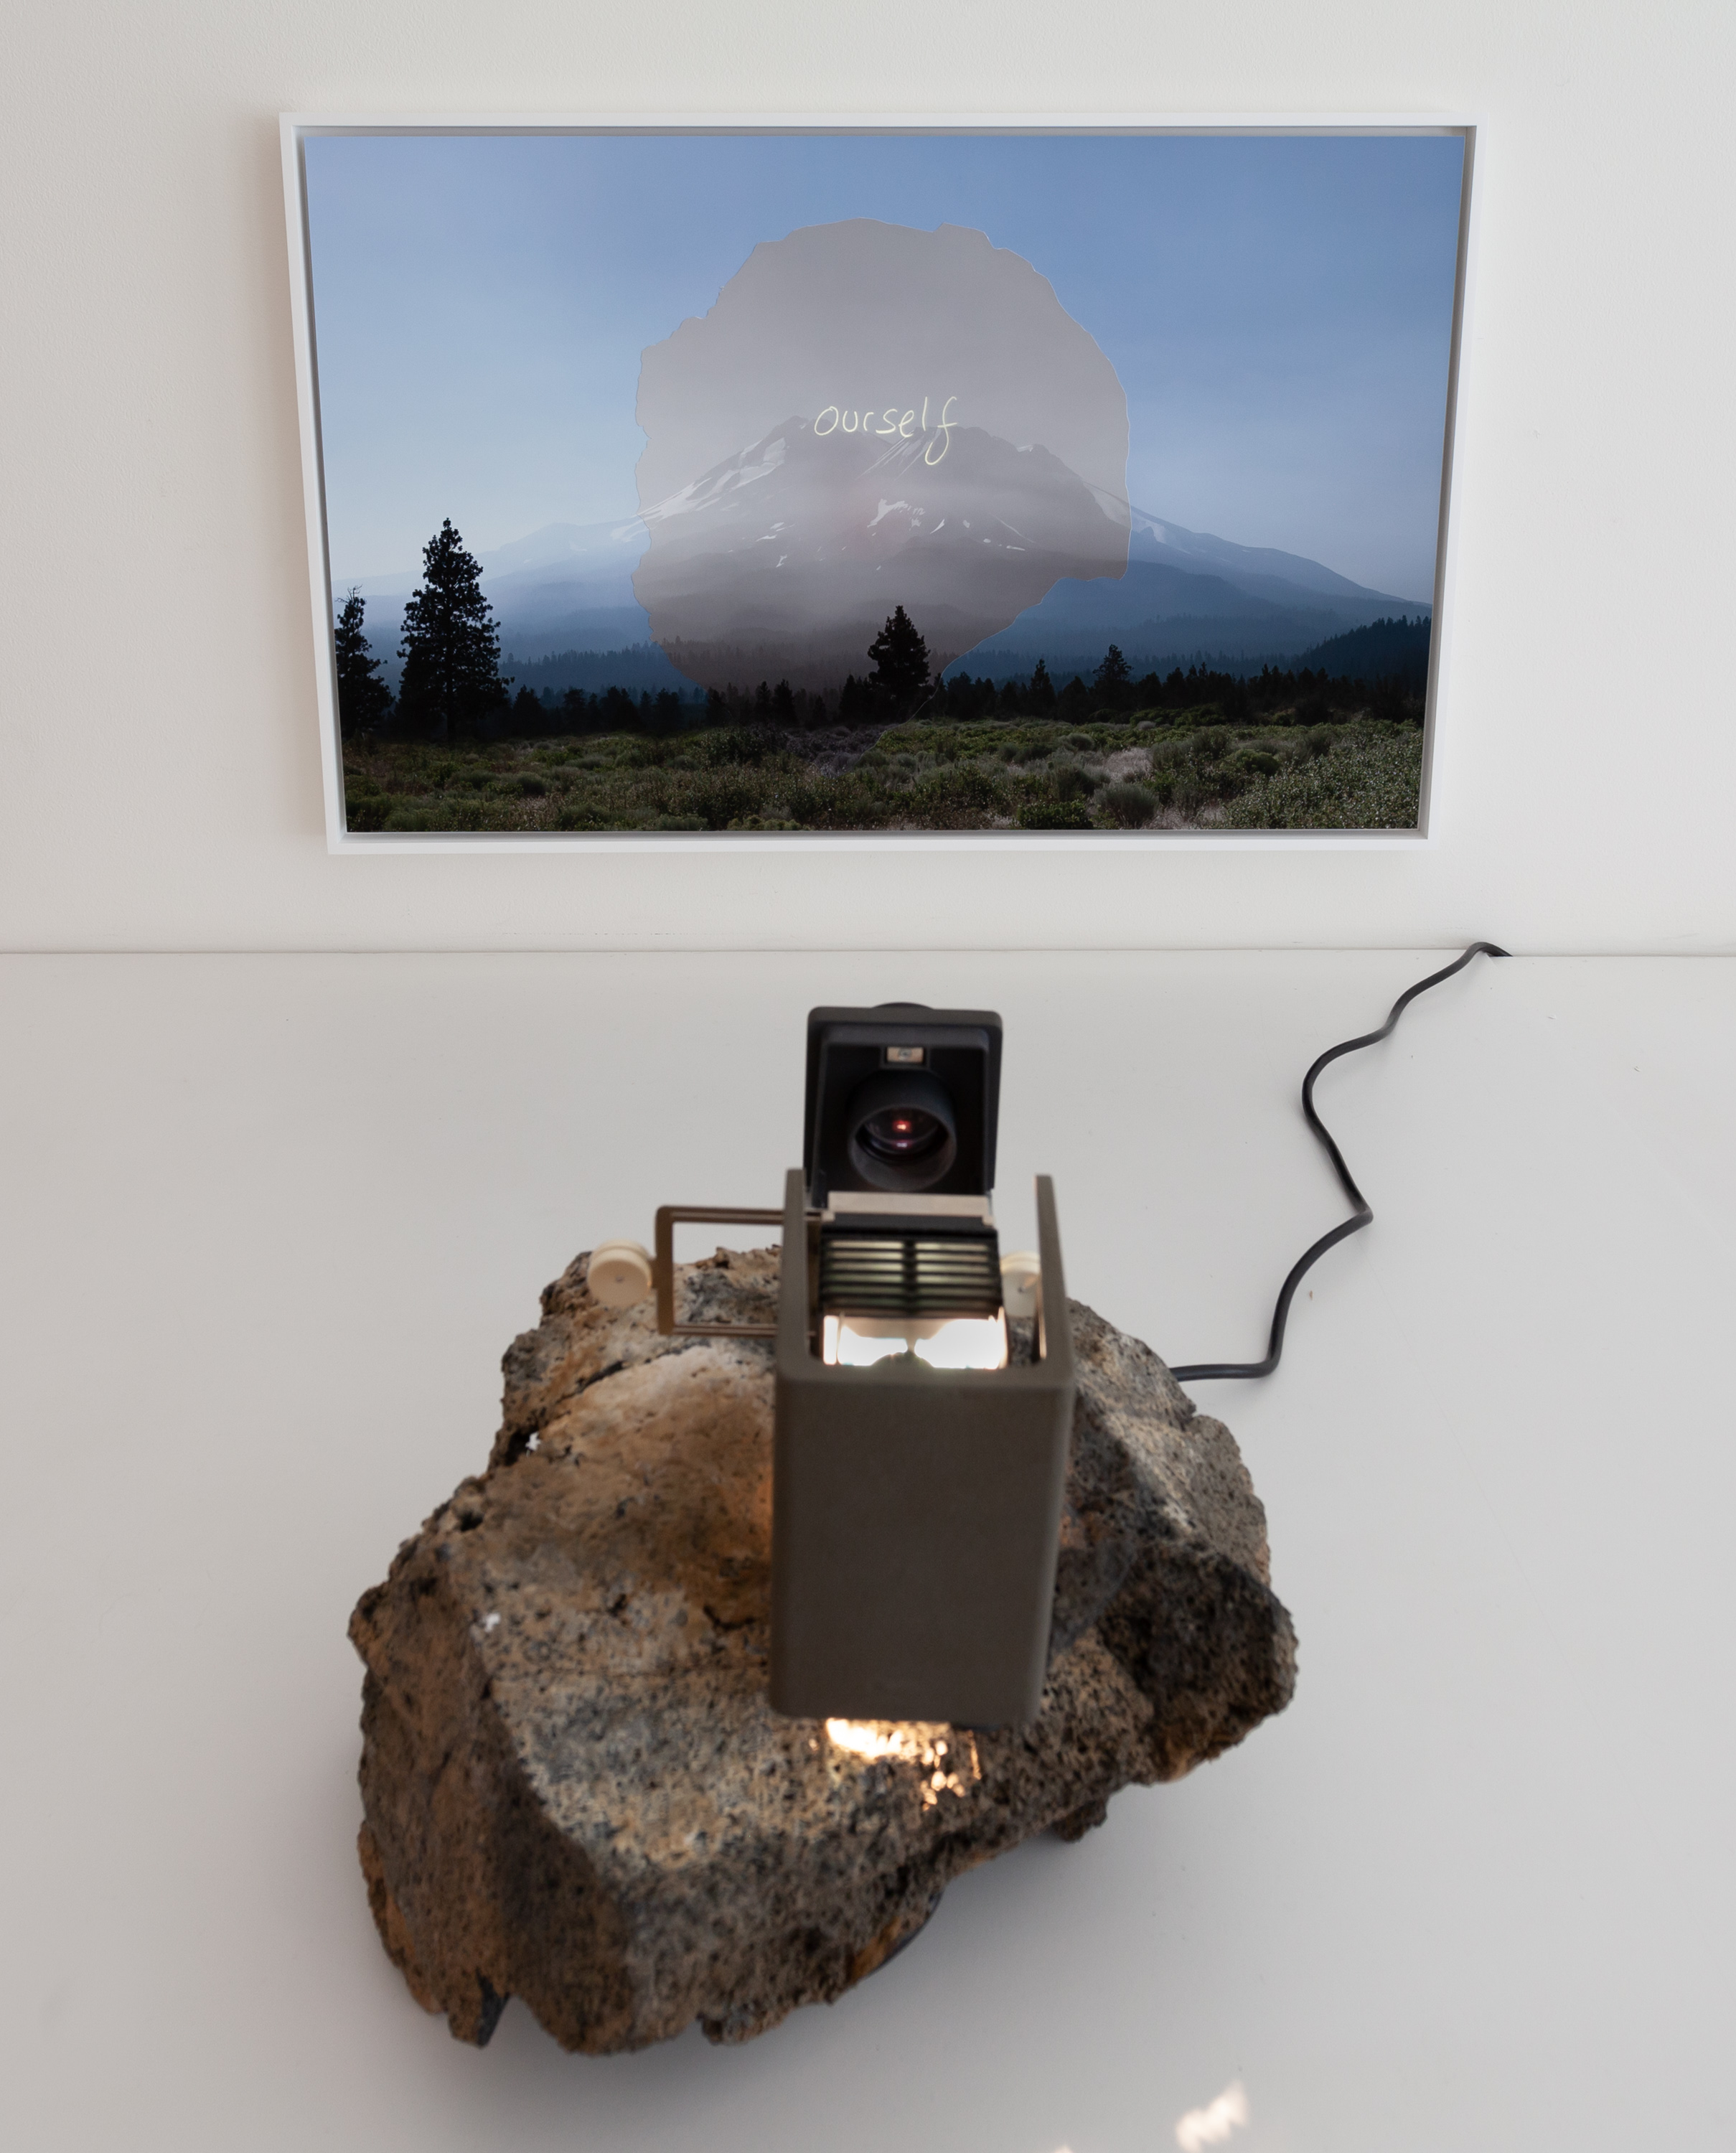 Color photograph of a mountain with overlaid text reading "ourself" being projected onto the image by a projector resting on a rock